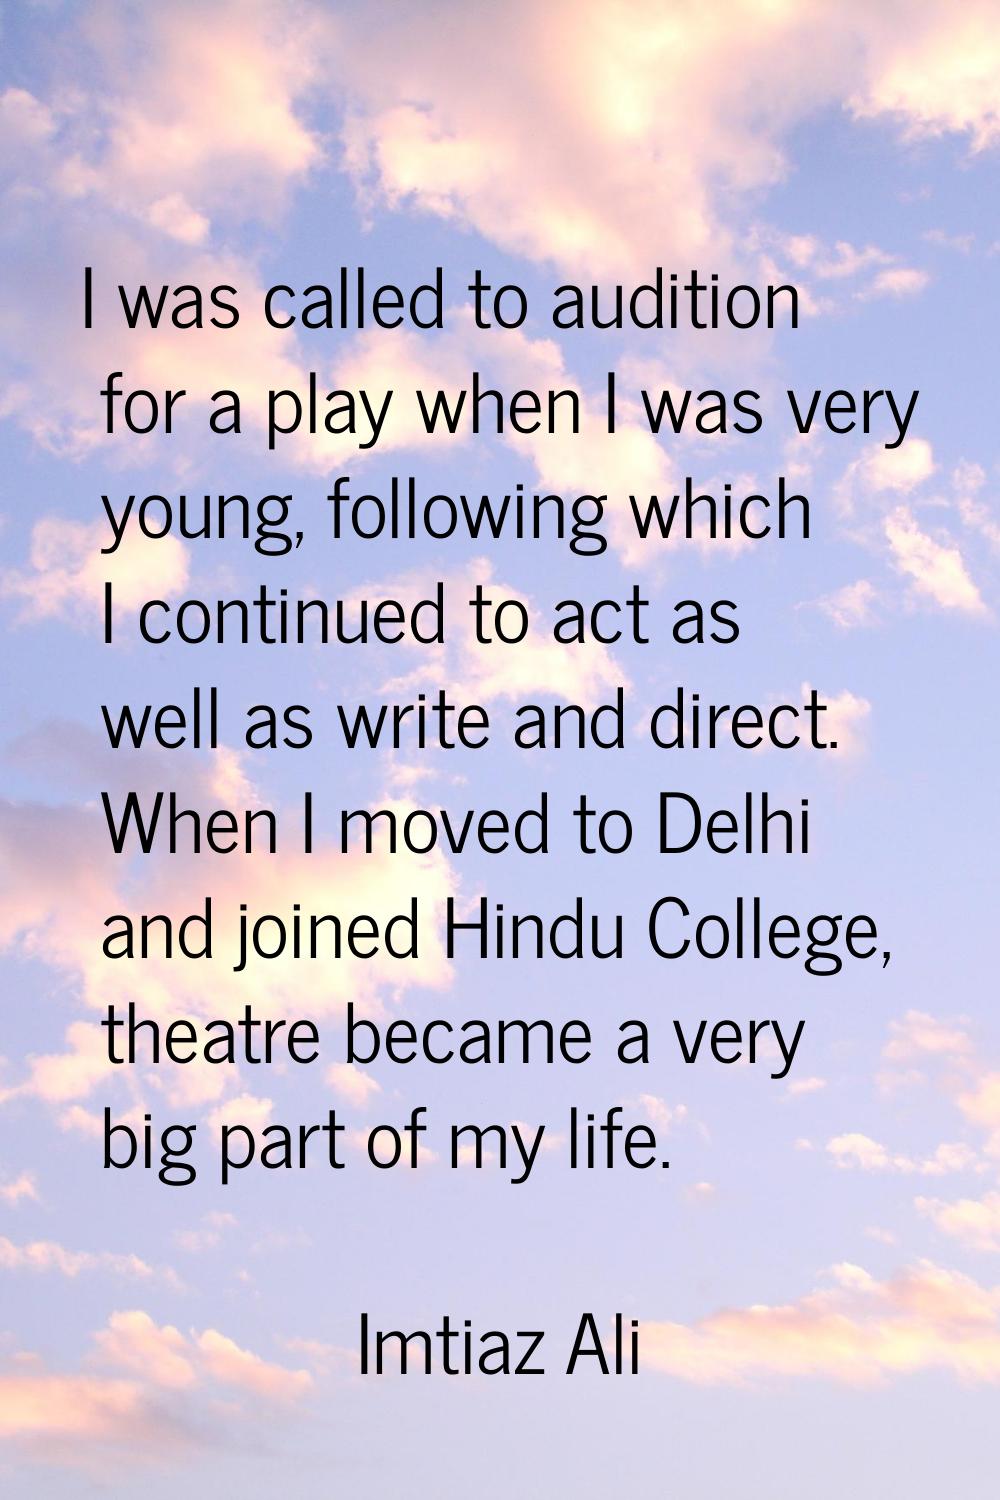 I was called to audition for a play when I was very young, following which I continued to act as we